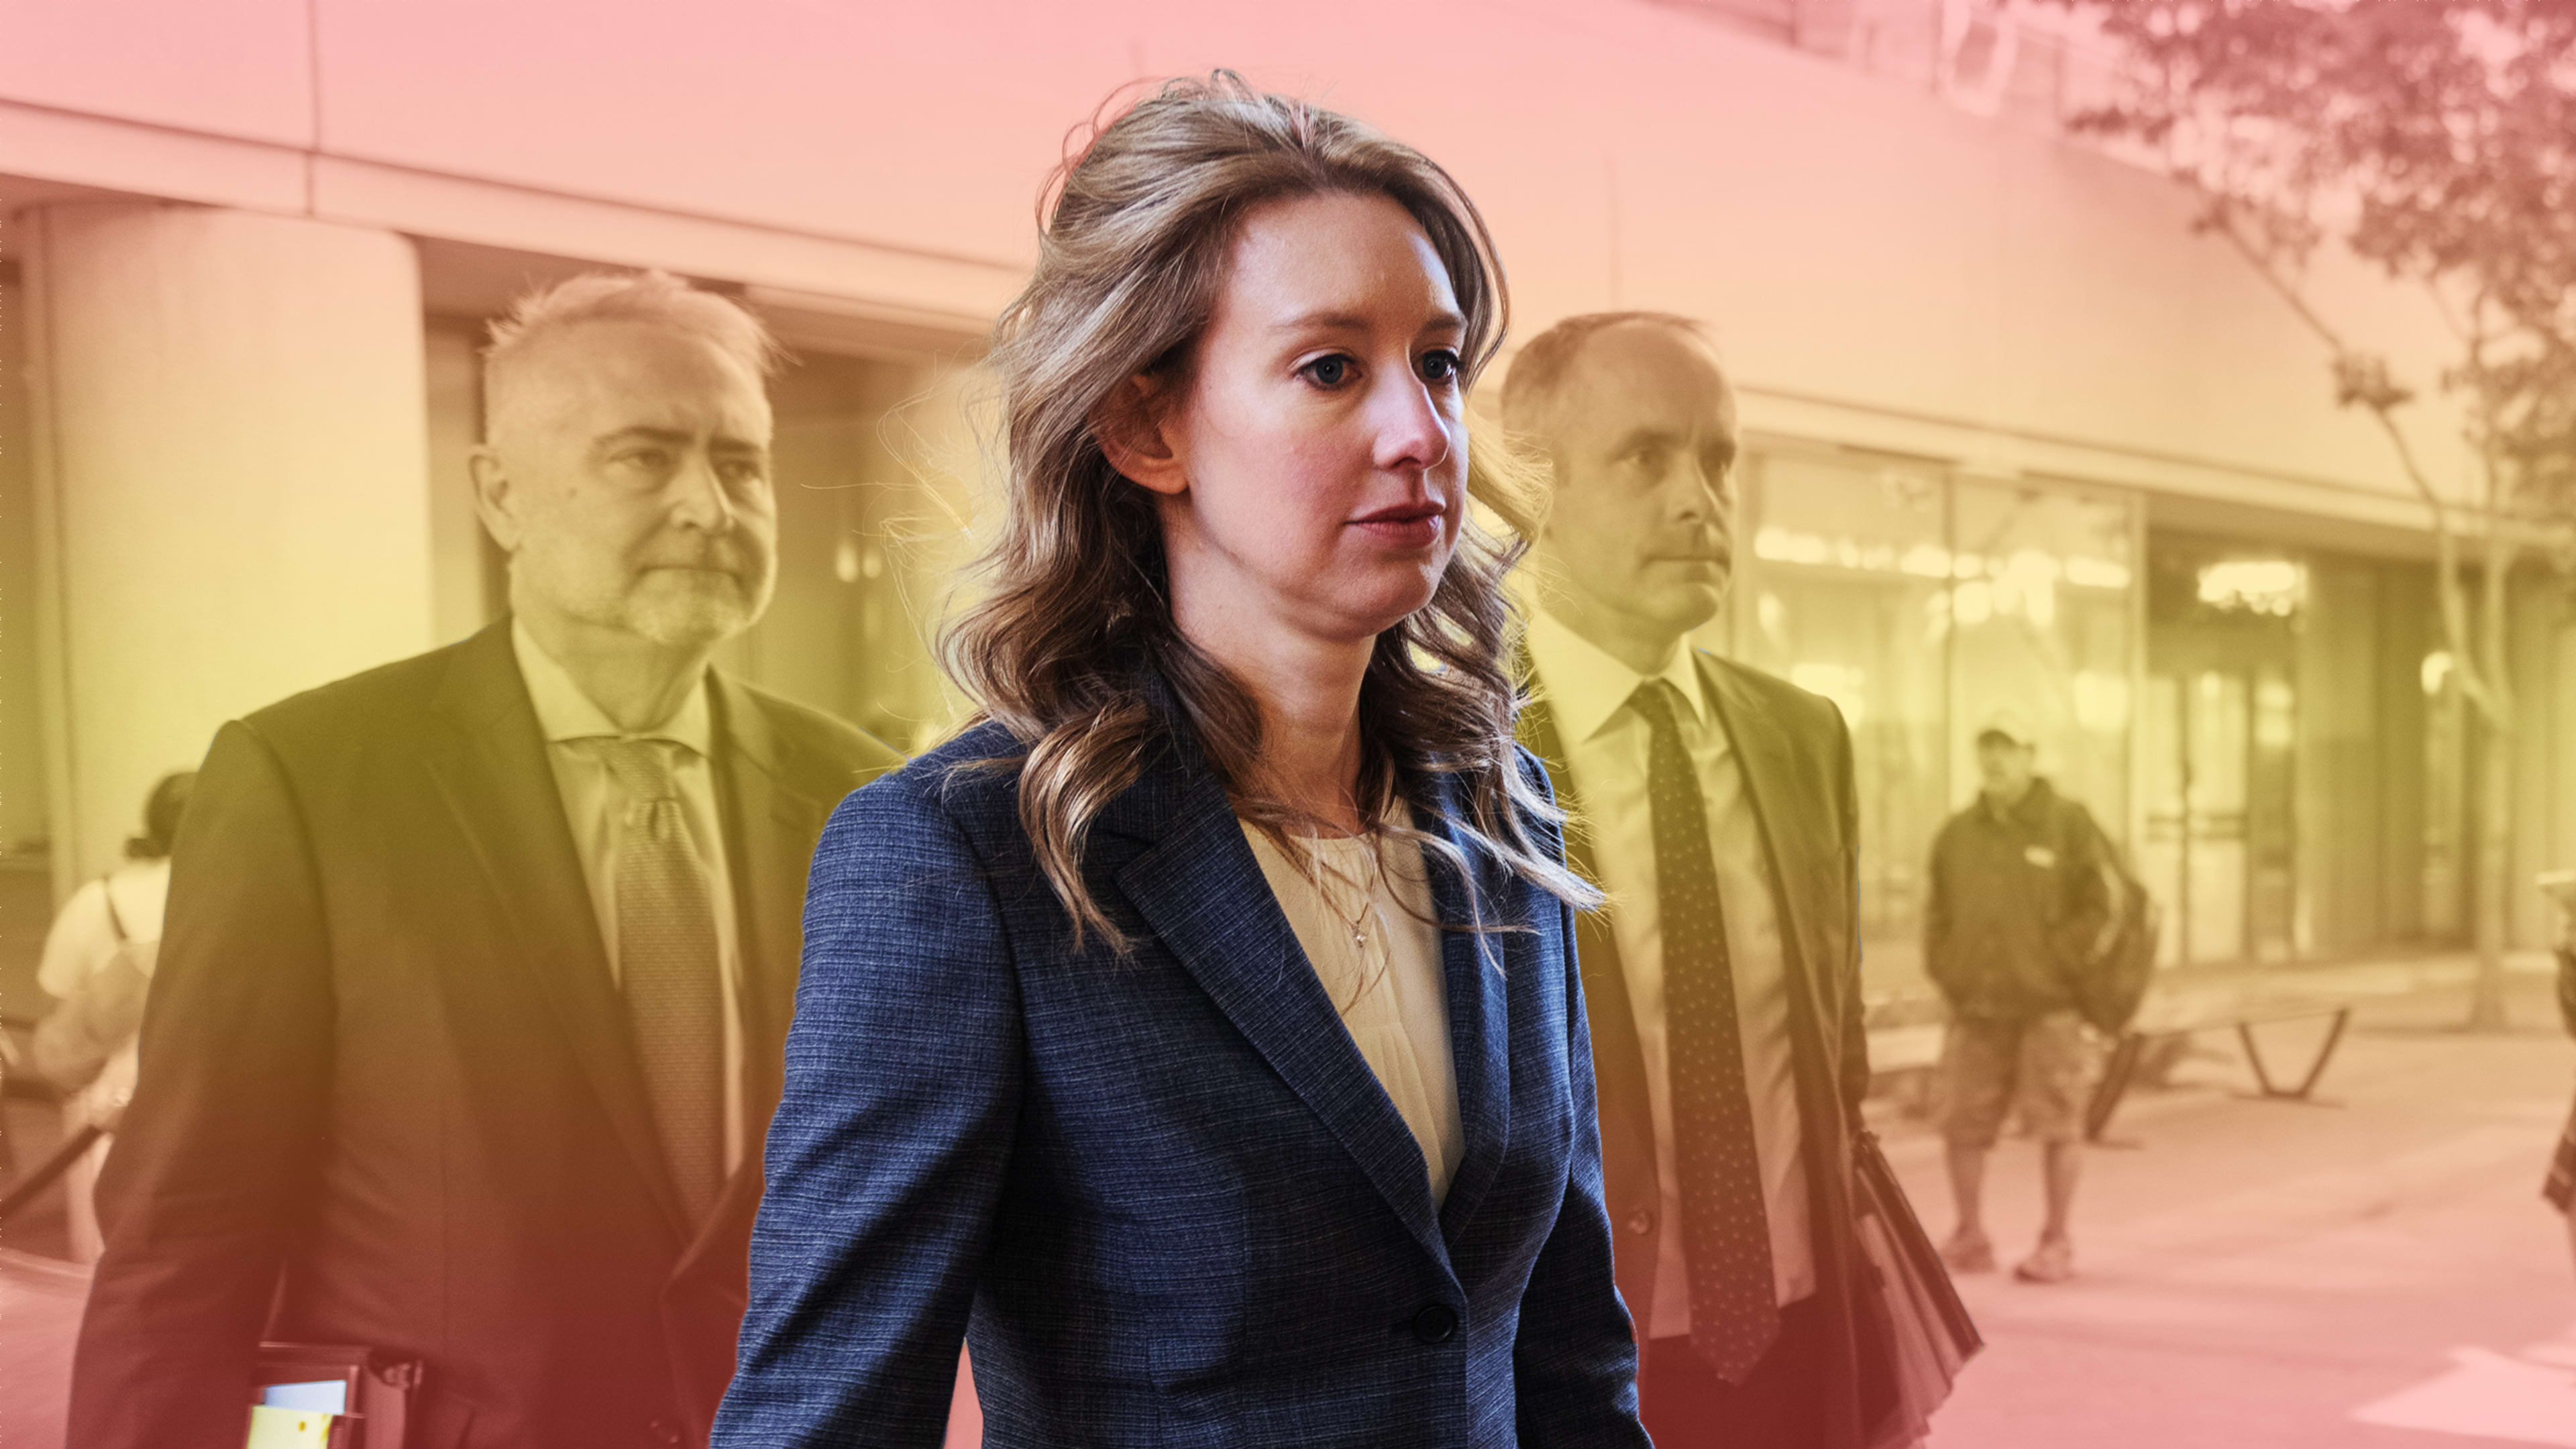 Elizabeth Holmes trial: What to know about the Theranos founder’s downfall and fraud case